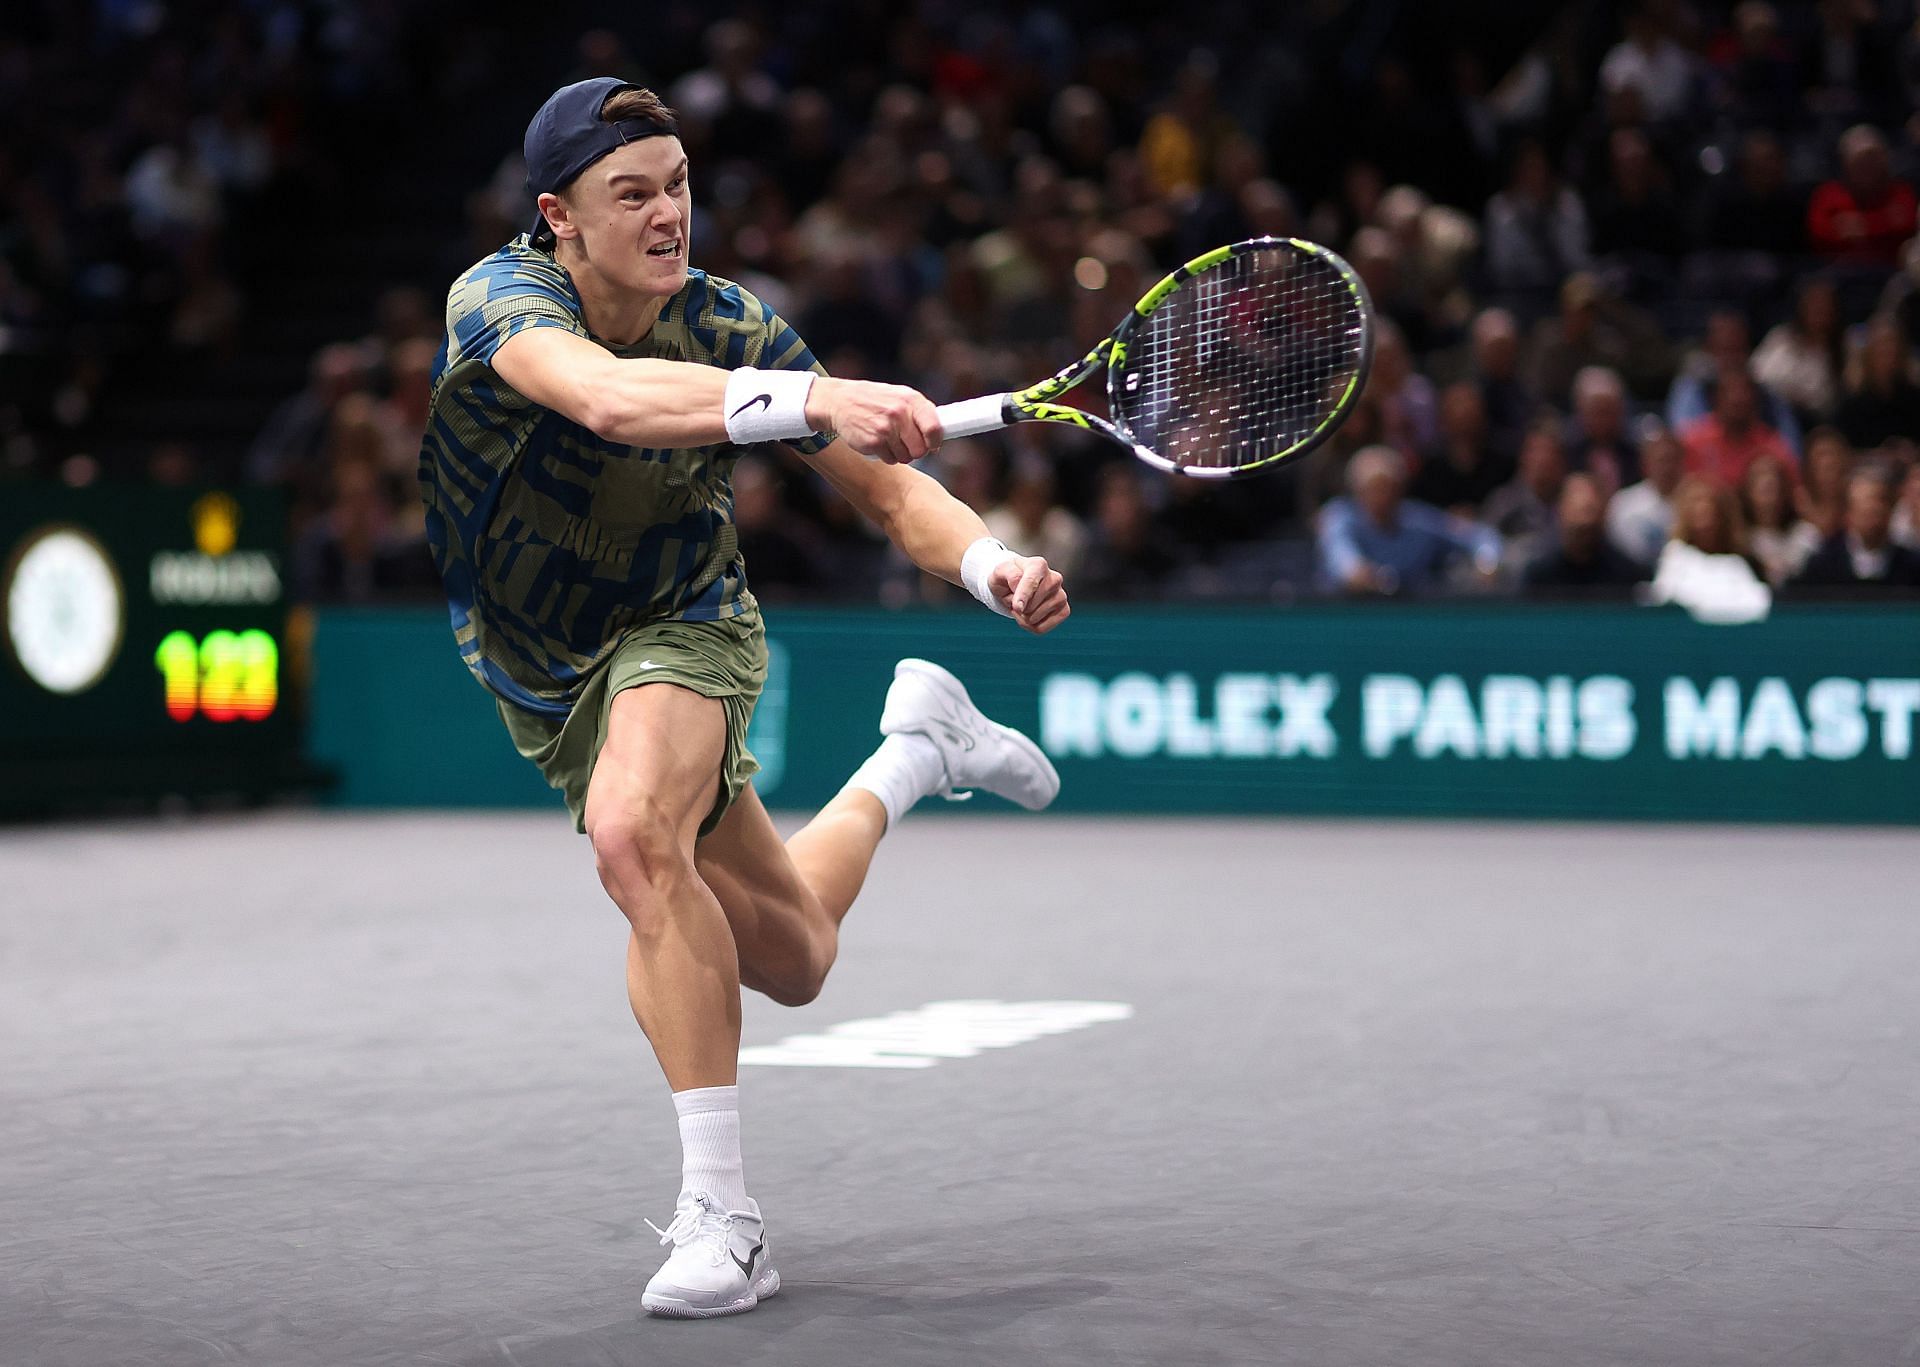 Holger Rune in action at the 2022 Paris Masters